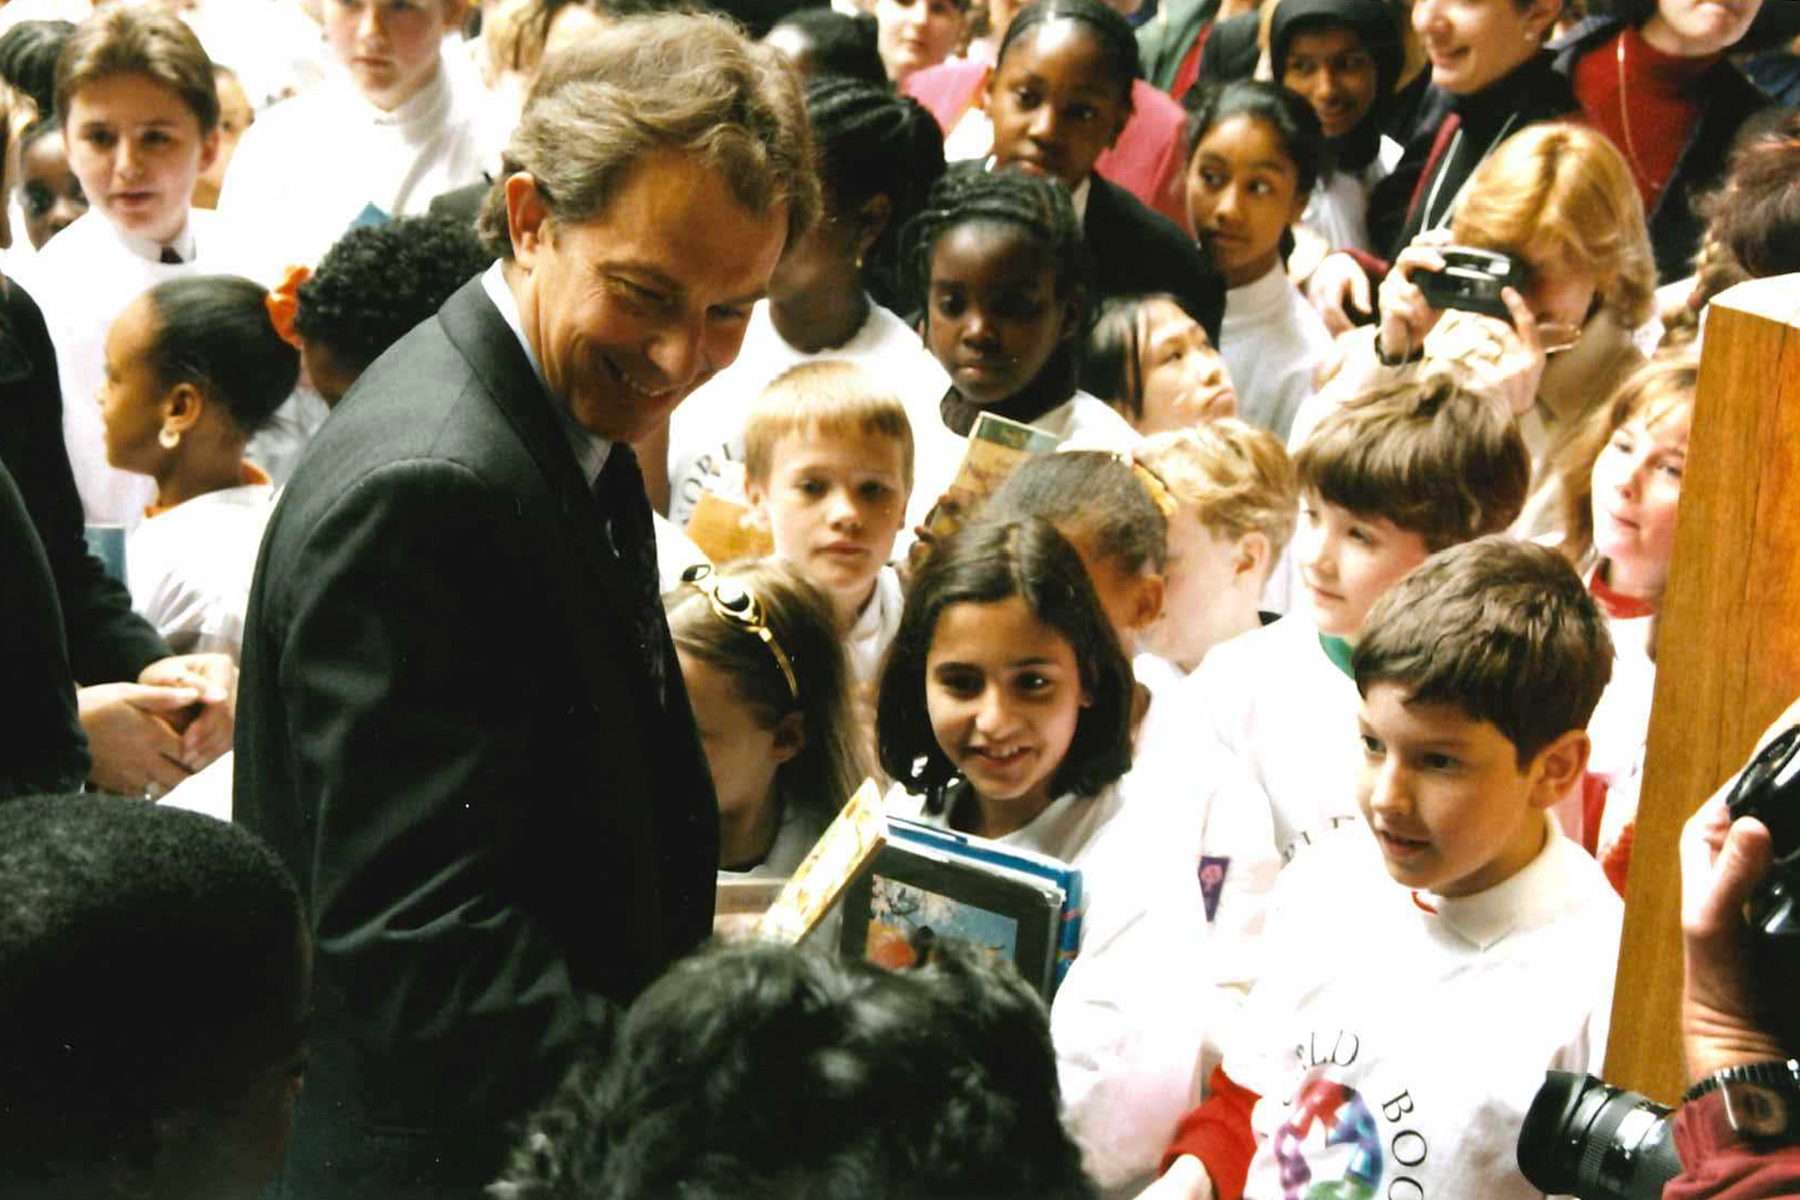 A photograph from 1997 of Tony Blair standing in the Globe theatre surrounded by school children